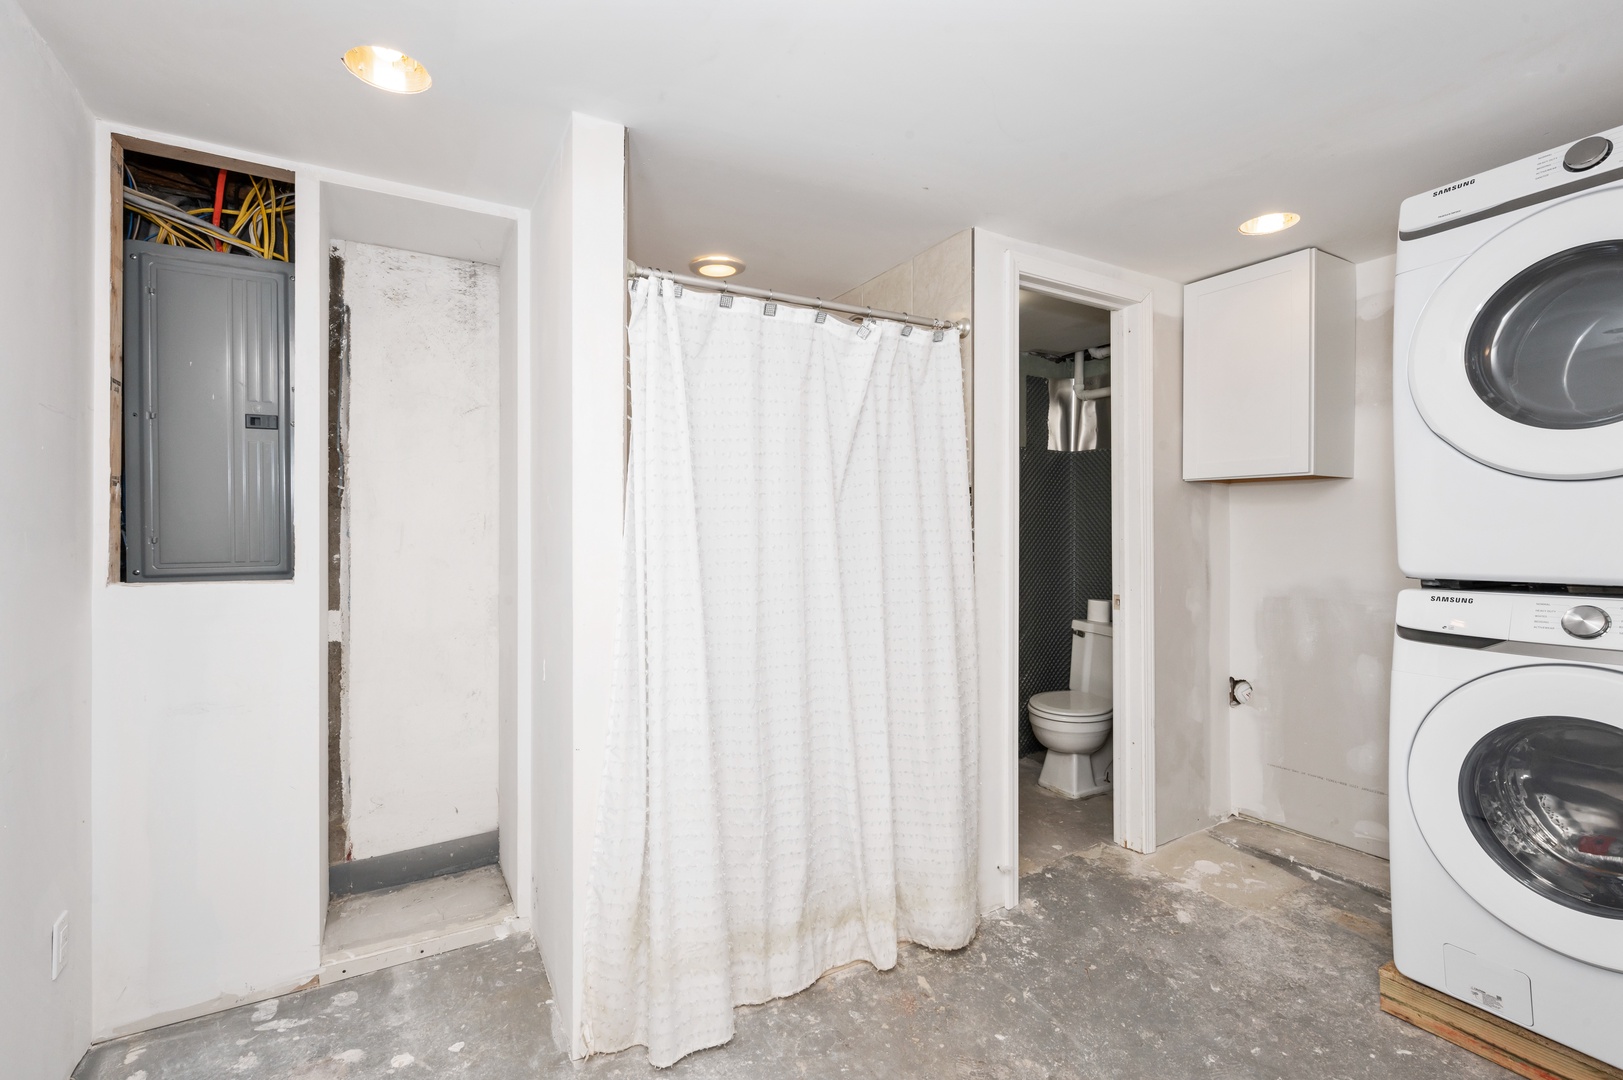 Private laundry is tucked away in the lower-level full bath, offering a shower